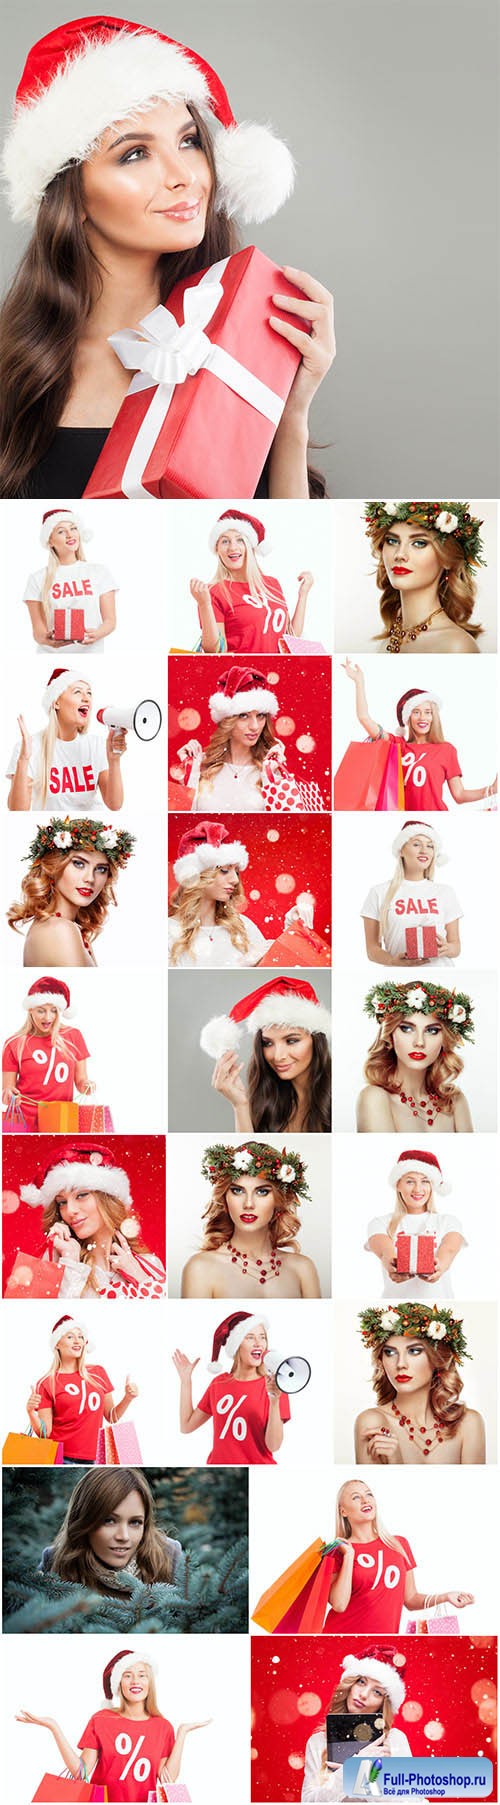 New Year and Christmas stock photos 74